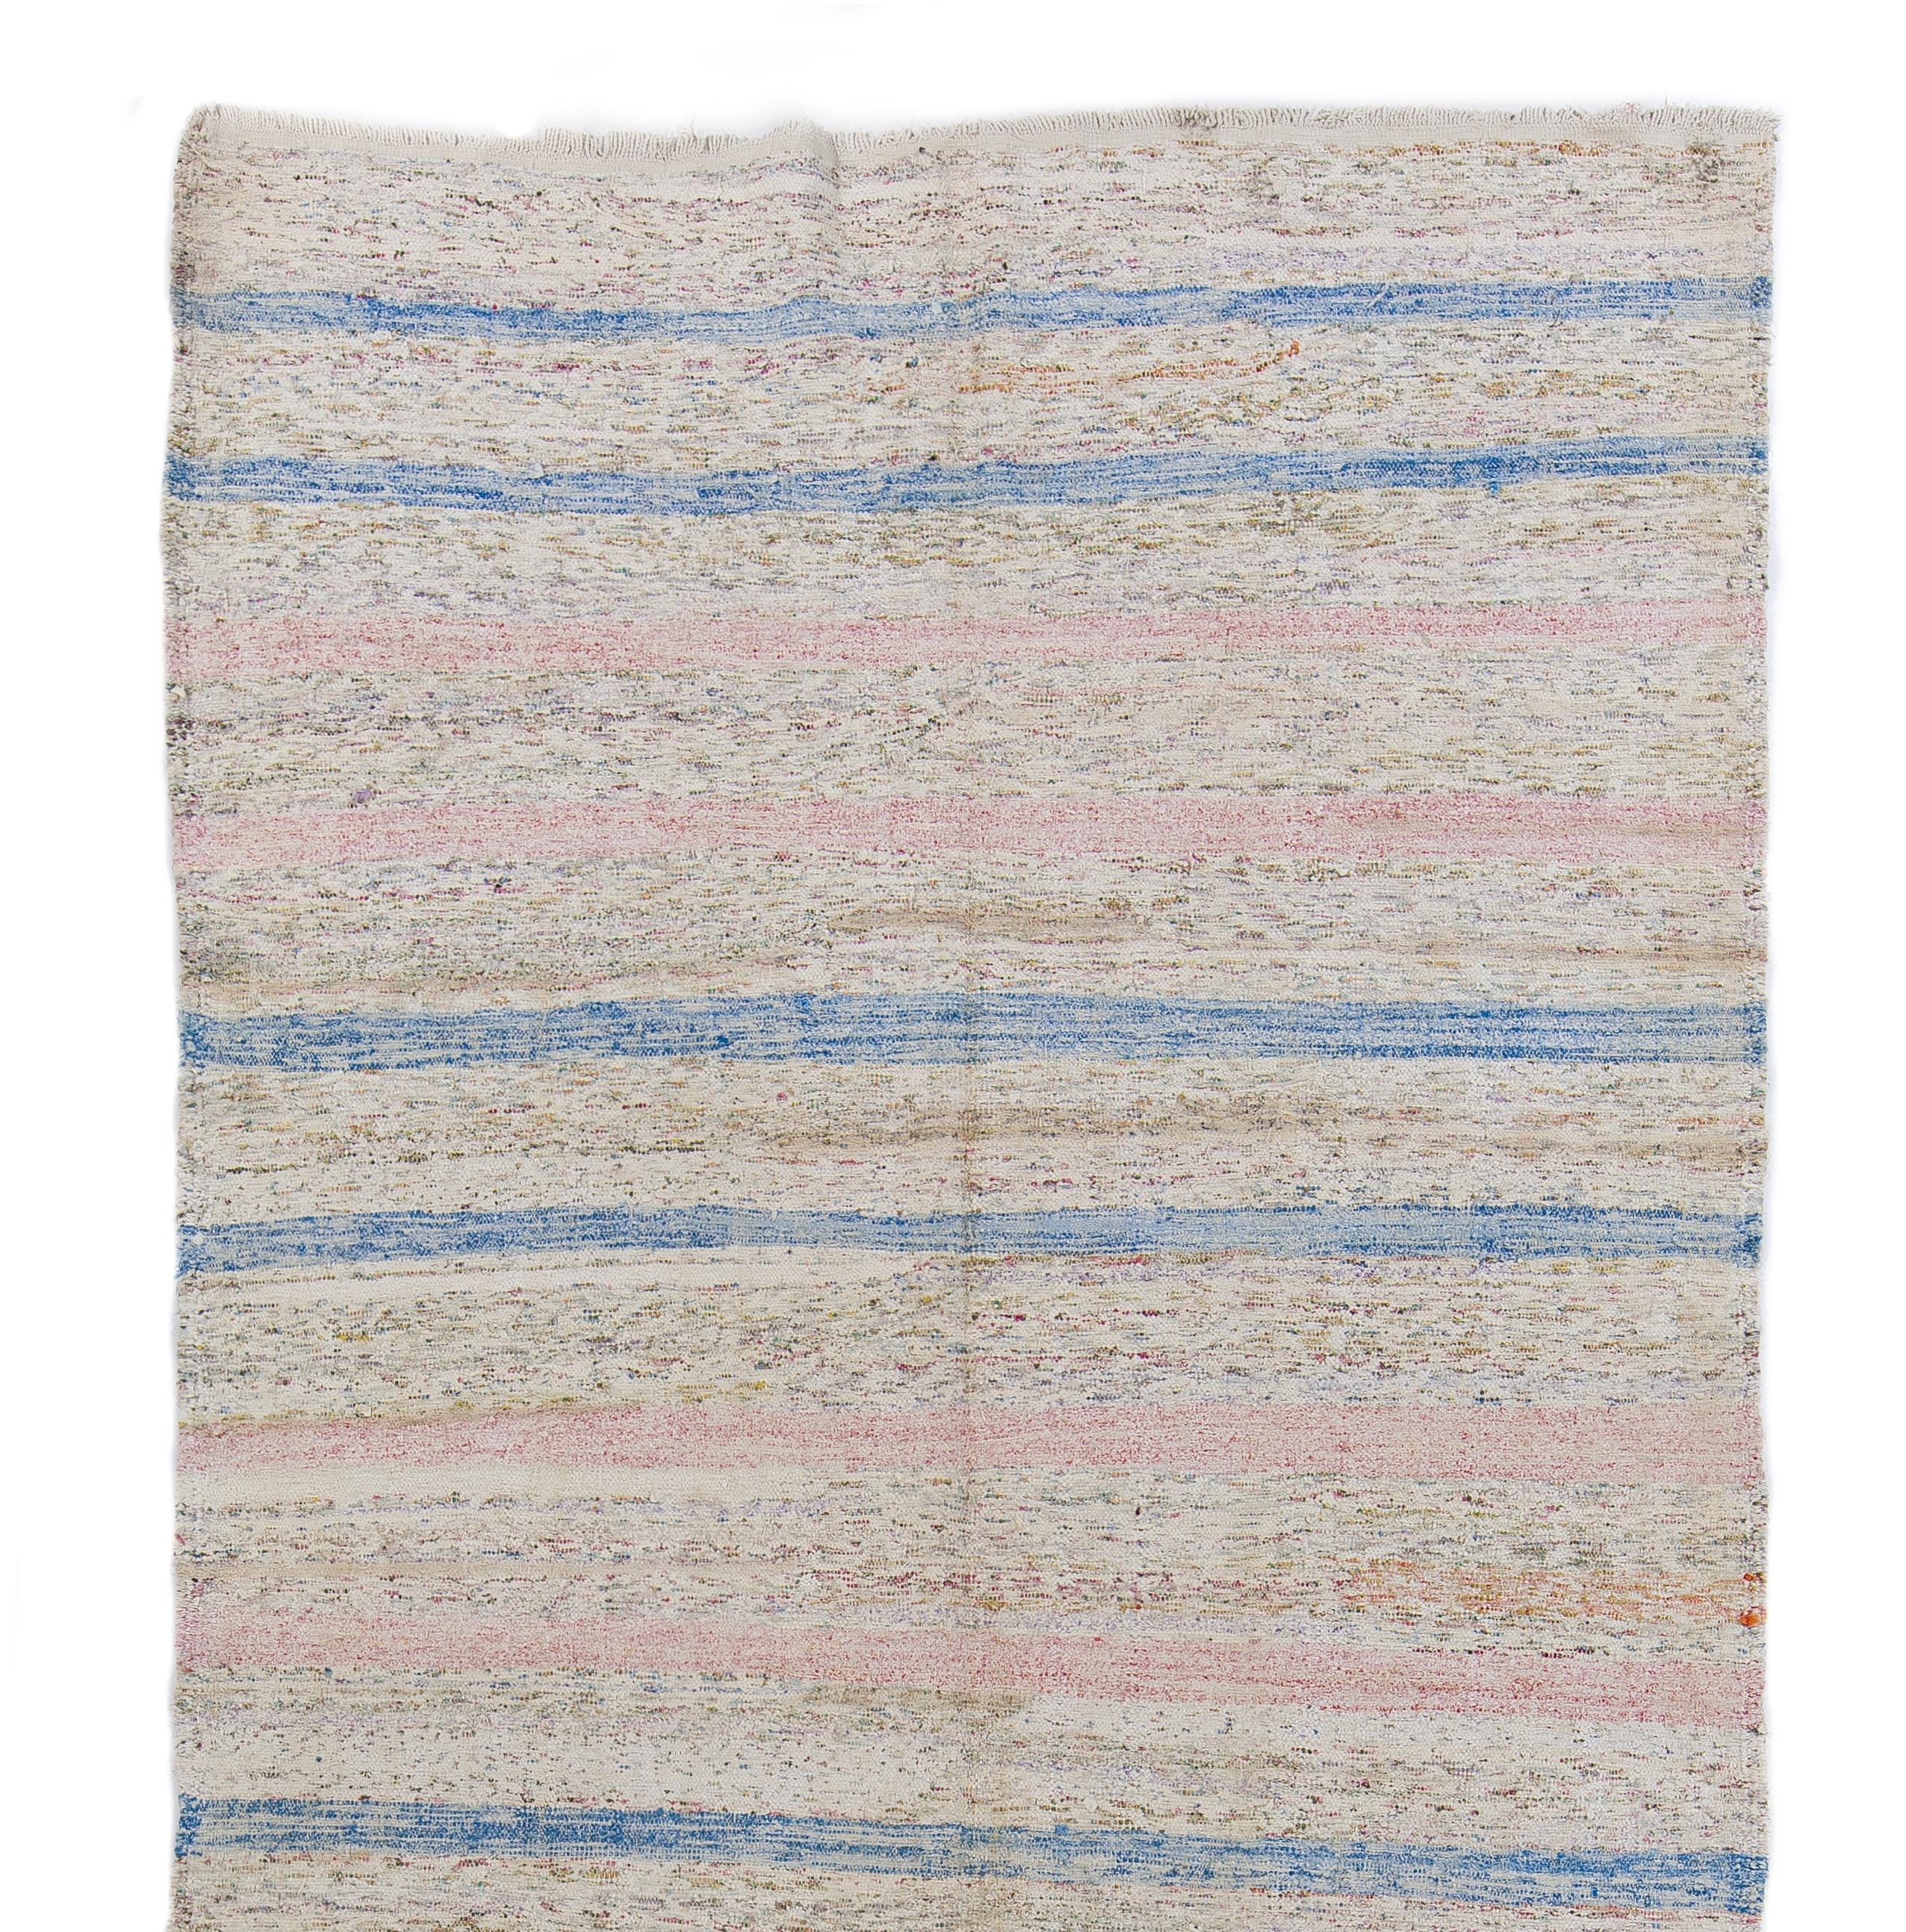 A vintage simple, minimalist and functional hand-woven flat-weave/kilim runner rug from Eastern Turkey, made of cotton, in the 1960s by then nomadic people of the area for their own daily use. It features a striped design in blue and pink against a